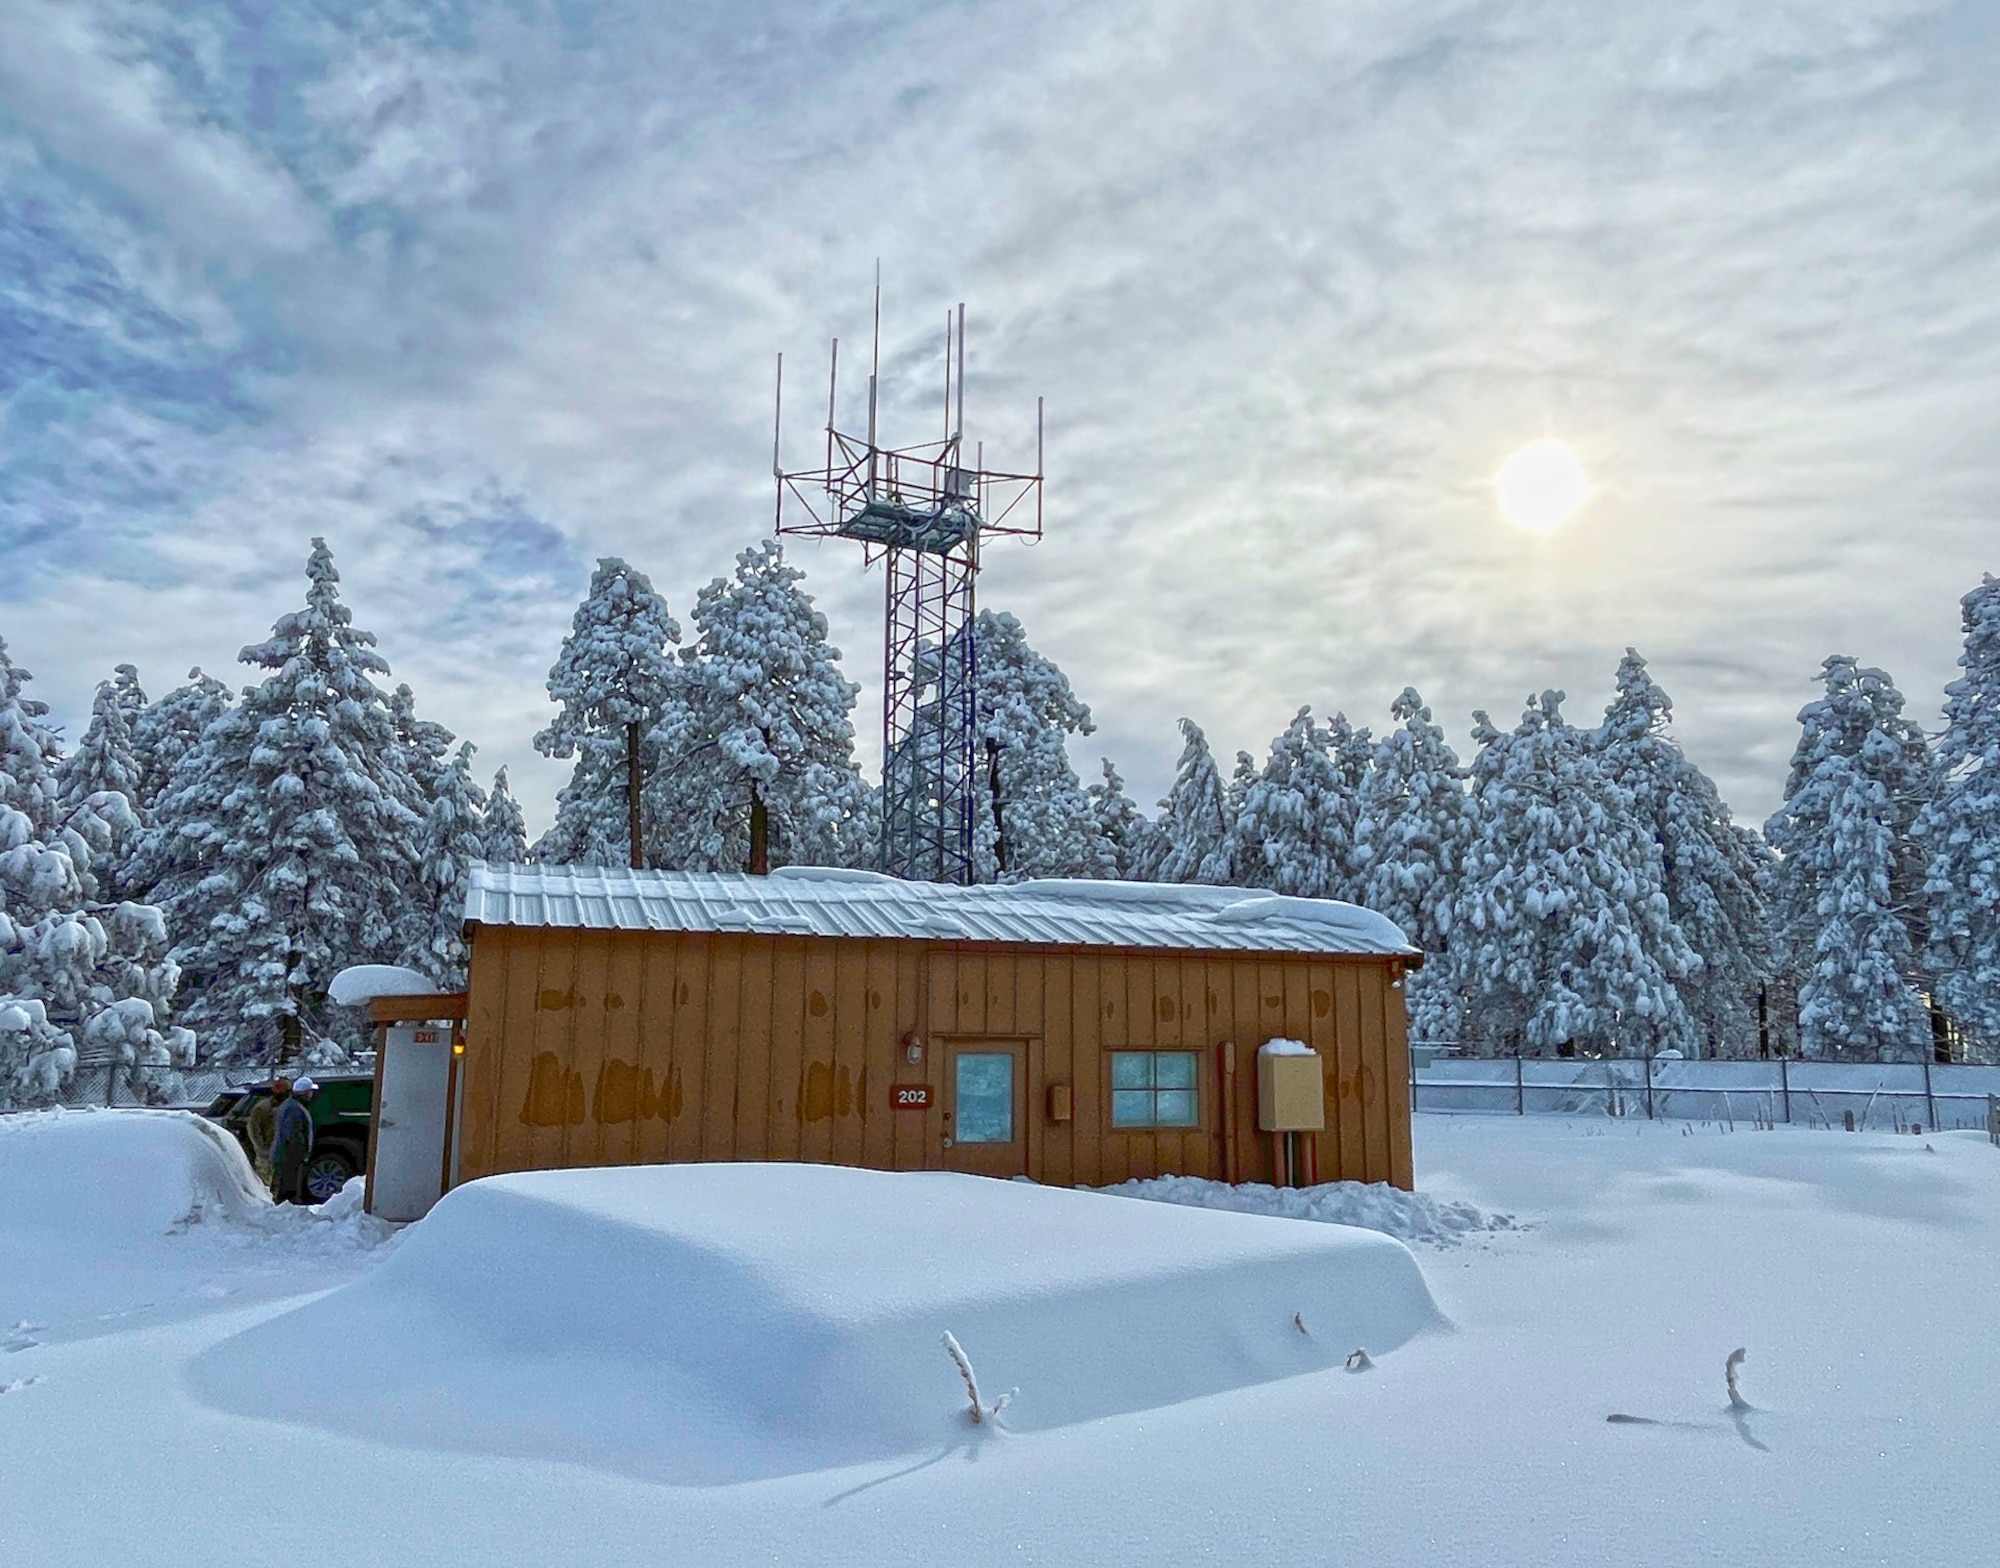 Exterior picture of Mt. Lemmon building and and radio tower covered in snow.